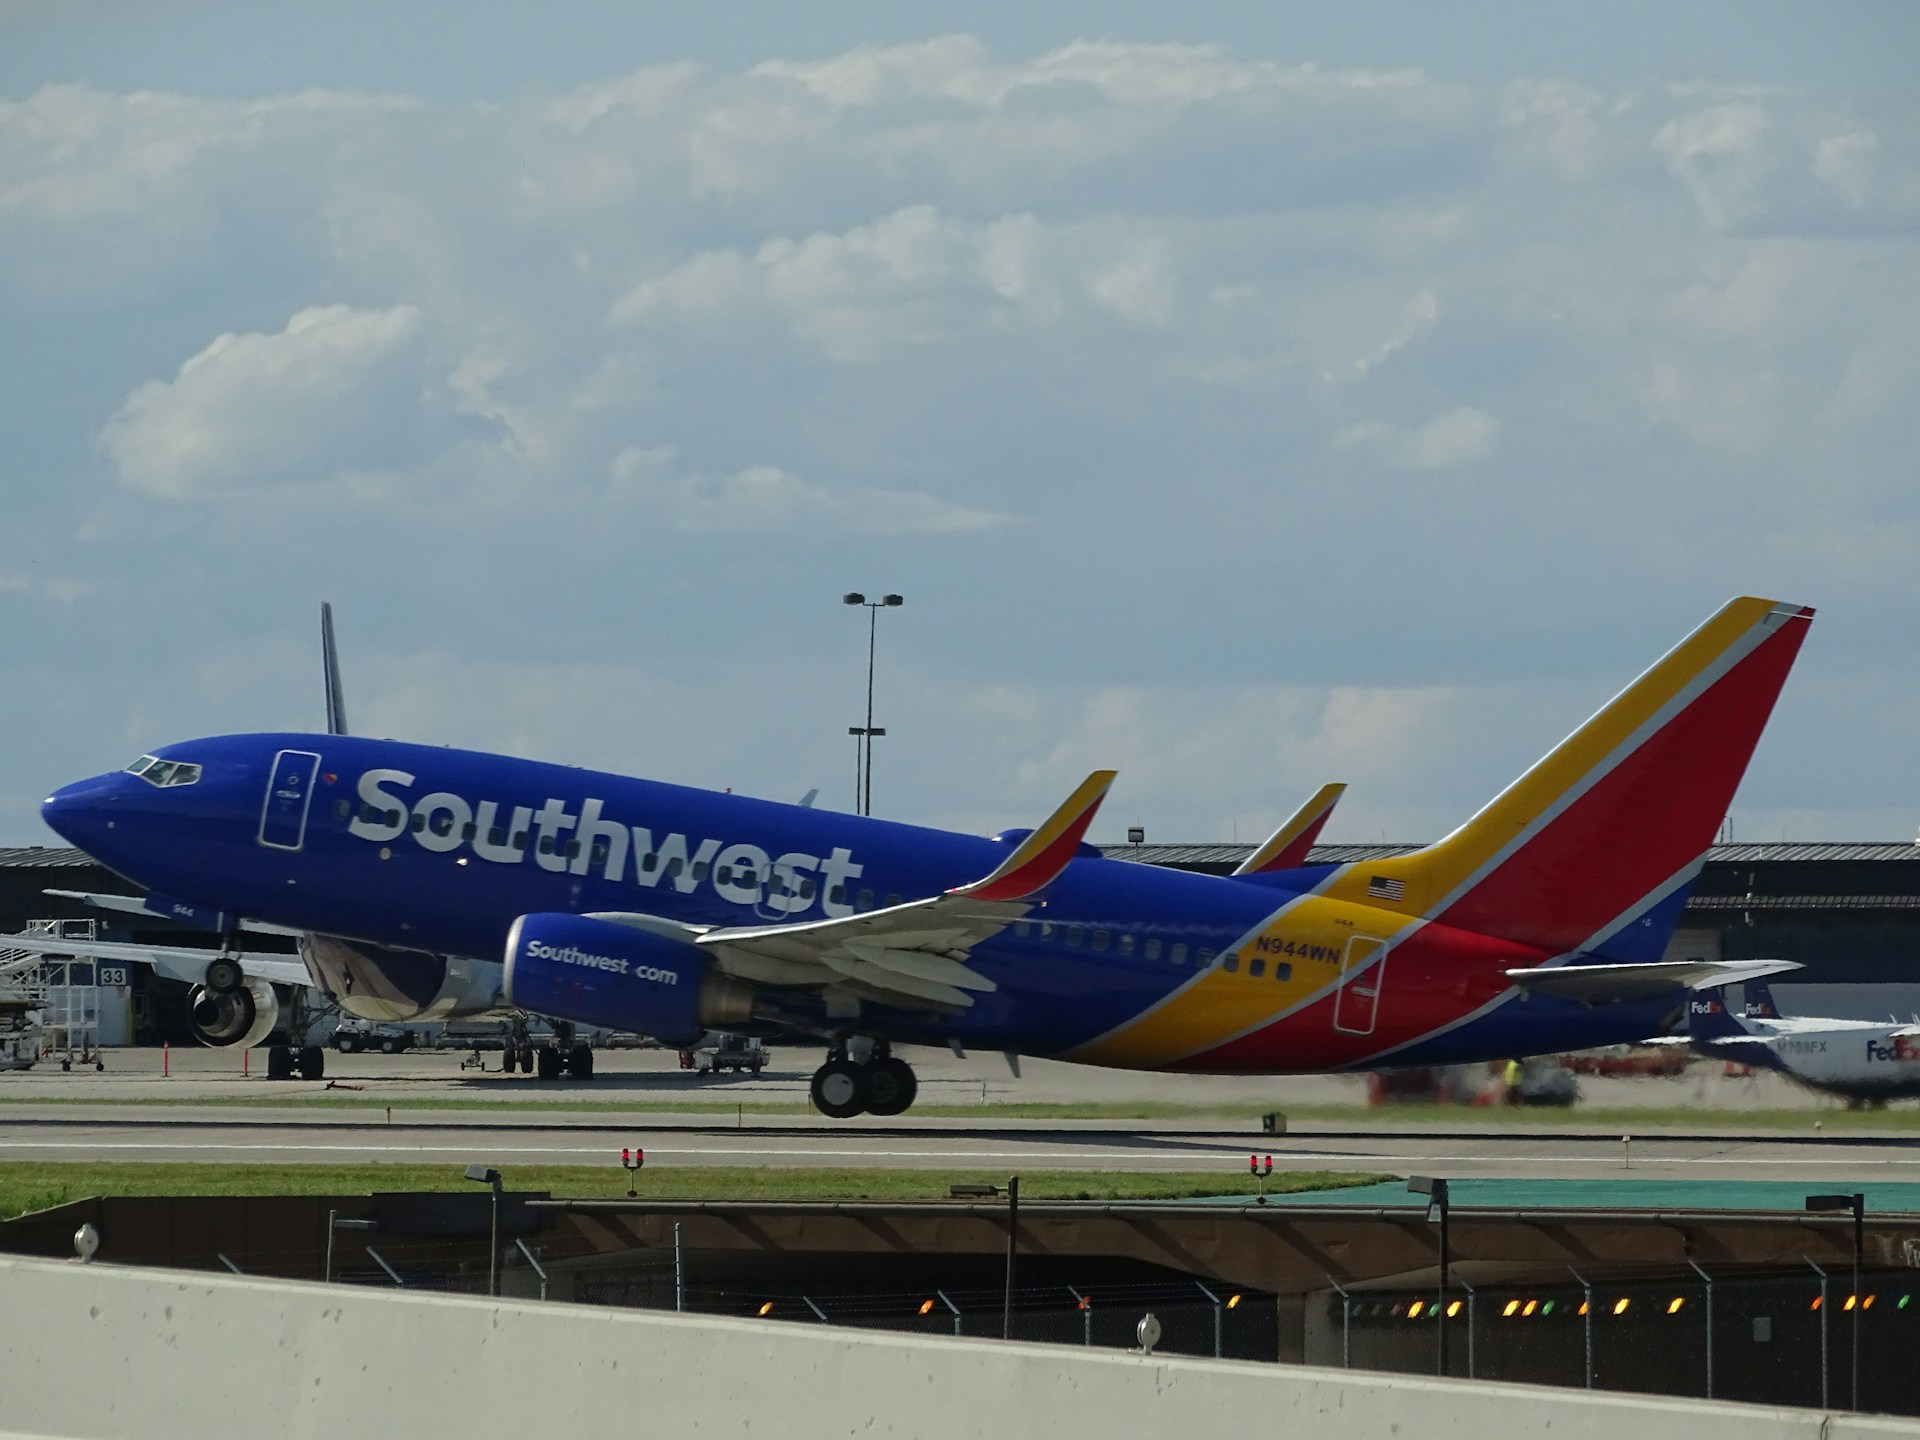 How to Use the Southwest Low Fare Calendar